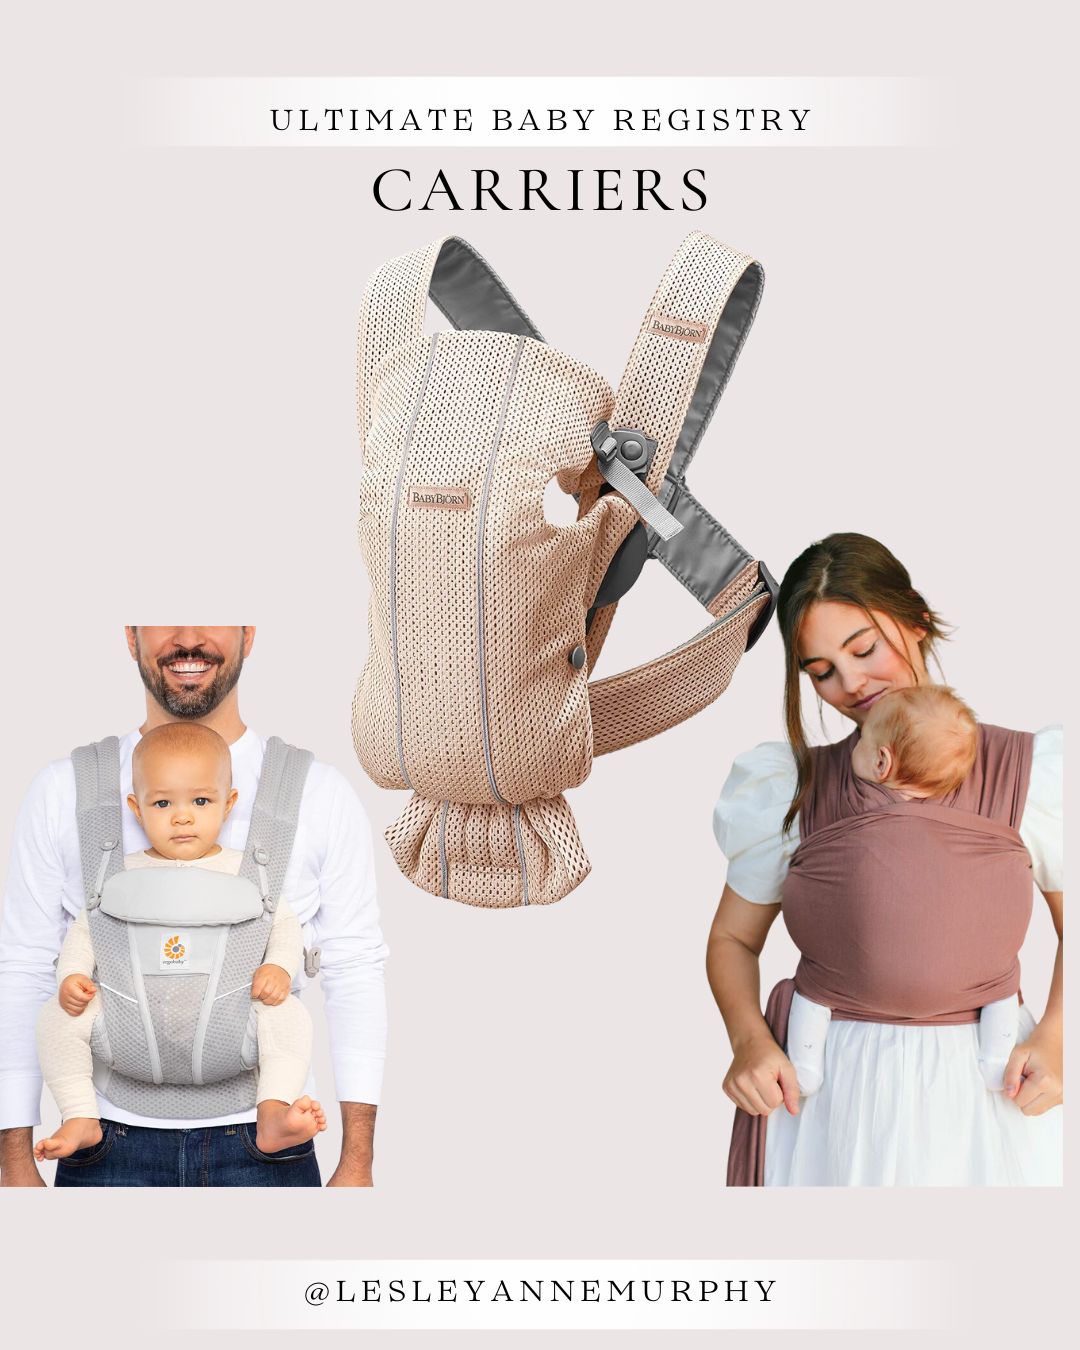 Our favorite baby carriers